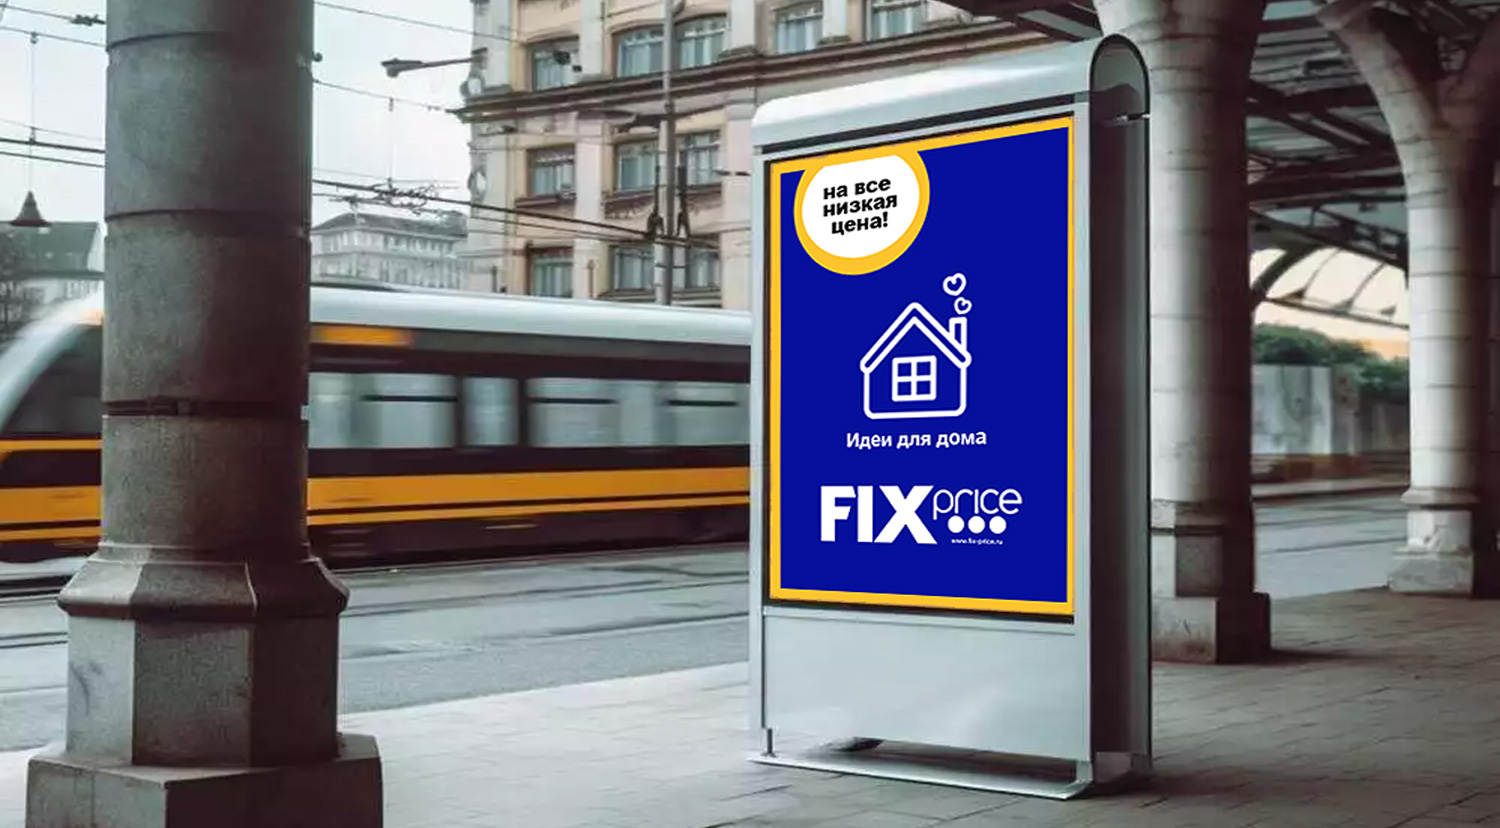 Fix Price Russia, City Centre Outdoor Transport Advertising, Branding and Graphic Communications